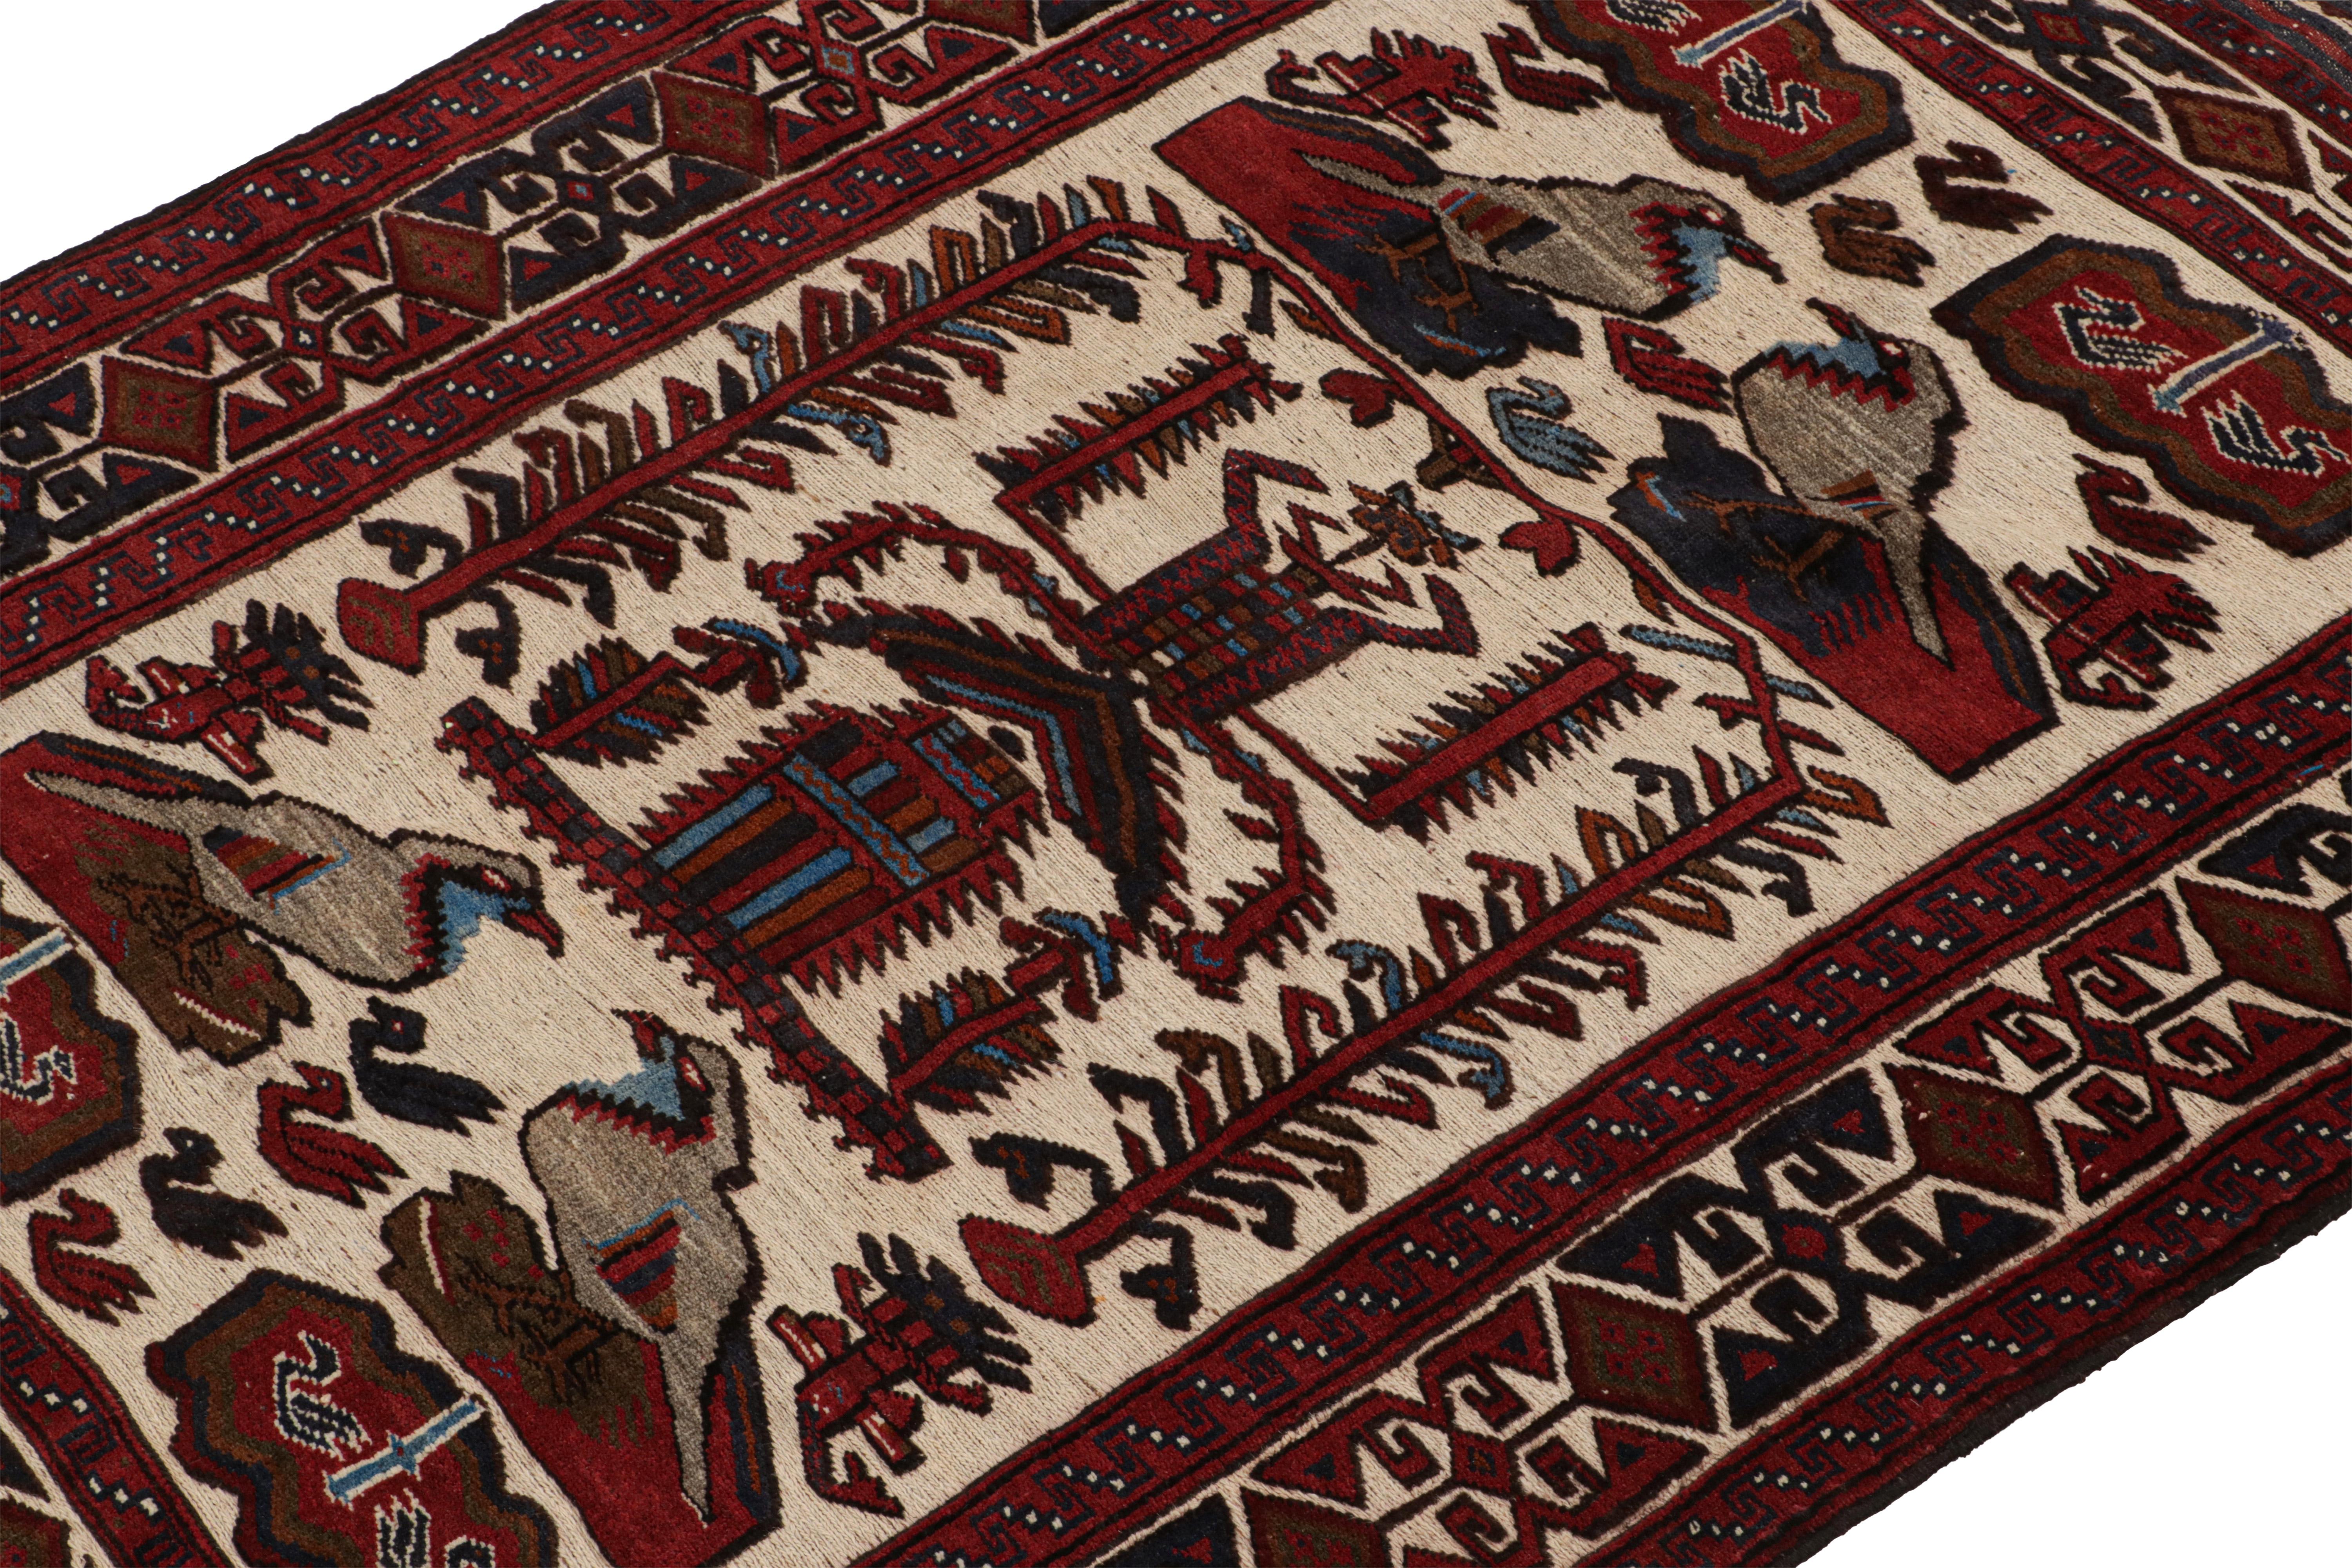 Afghan Rug & Kilim’s Persian Barjasta style rug in Beige & Red with Bird Pictorials  For Sale